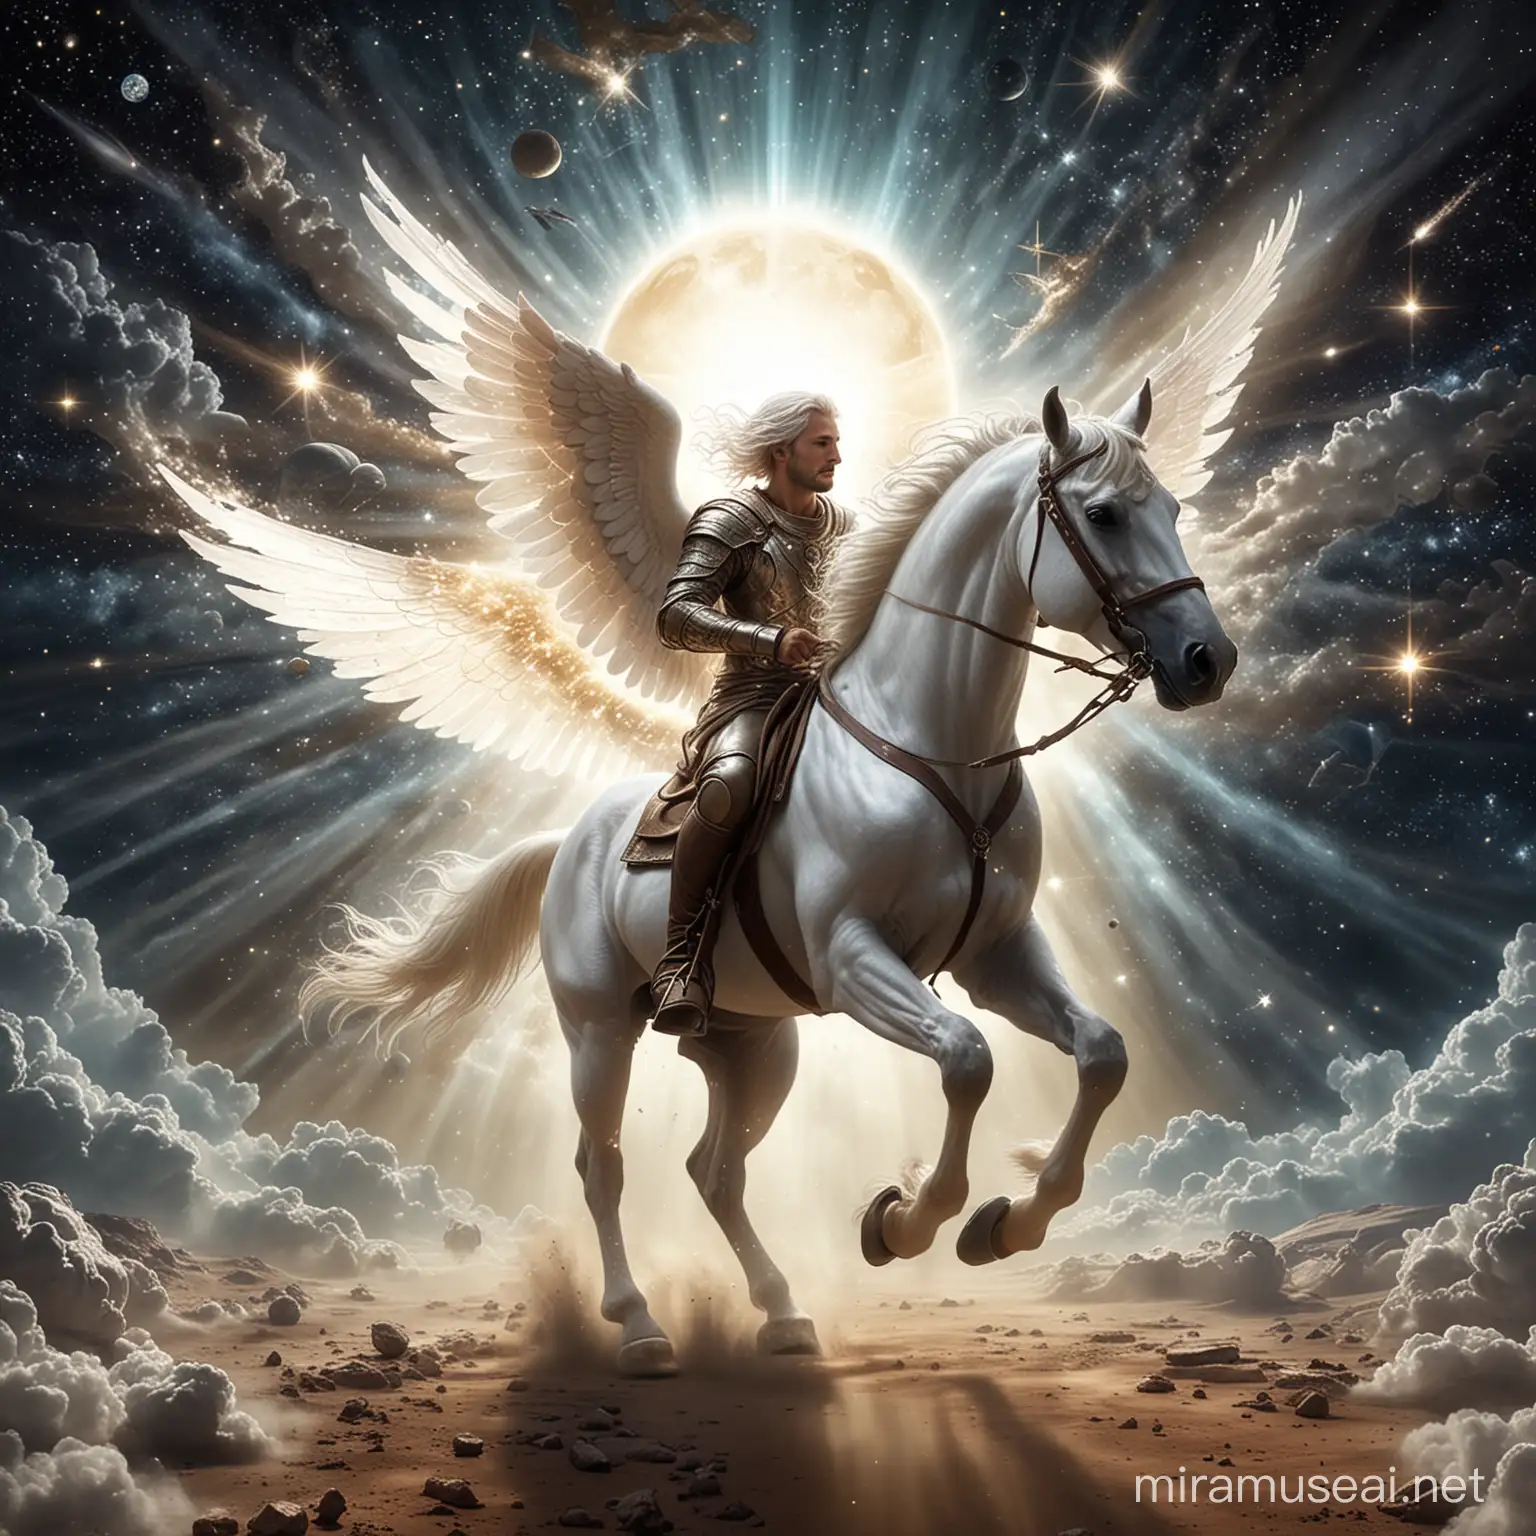 Celestial Journey Holy Man Riding Winged White Horse Through Cosmic Realms